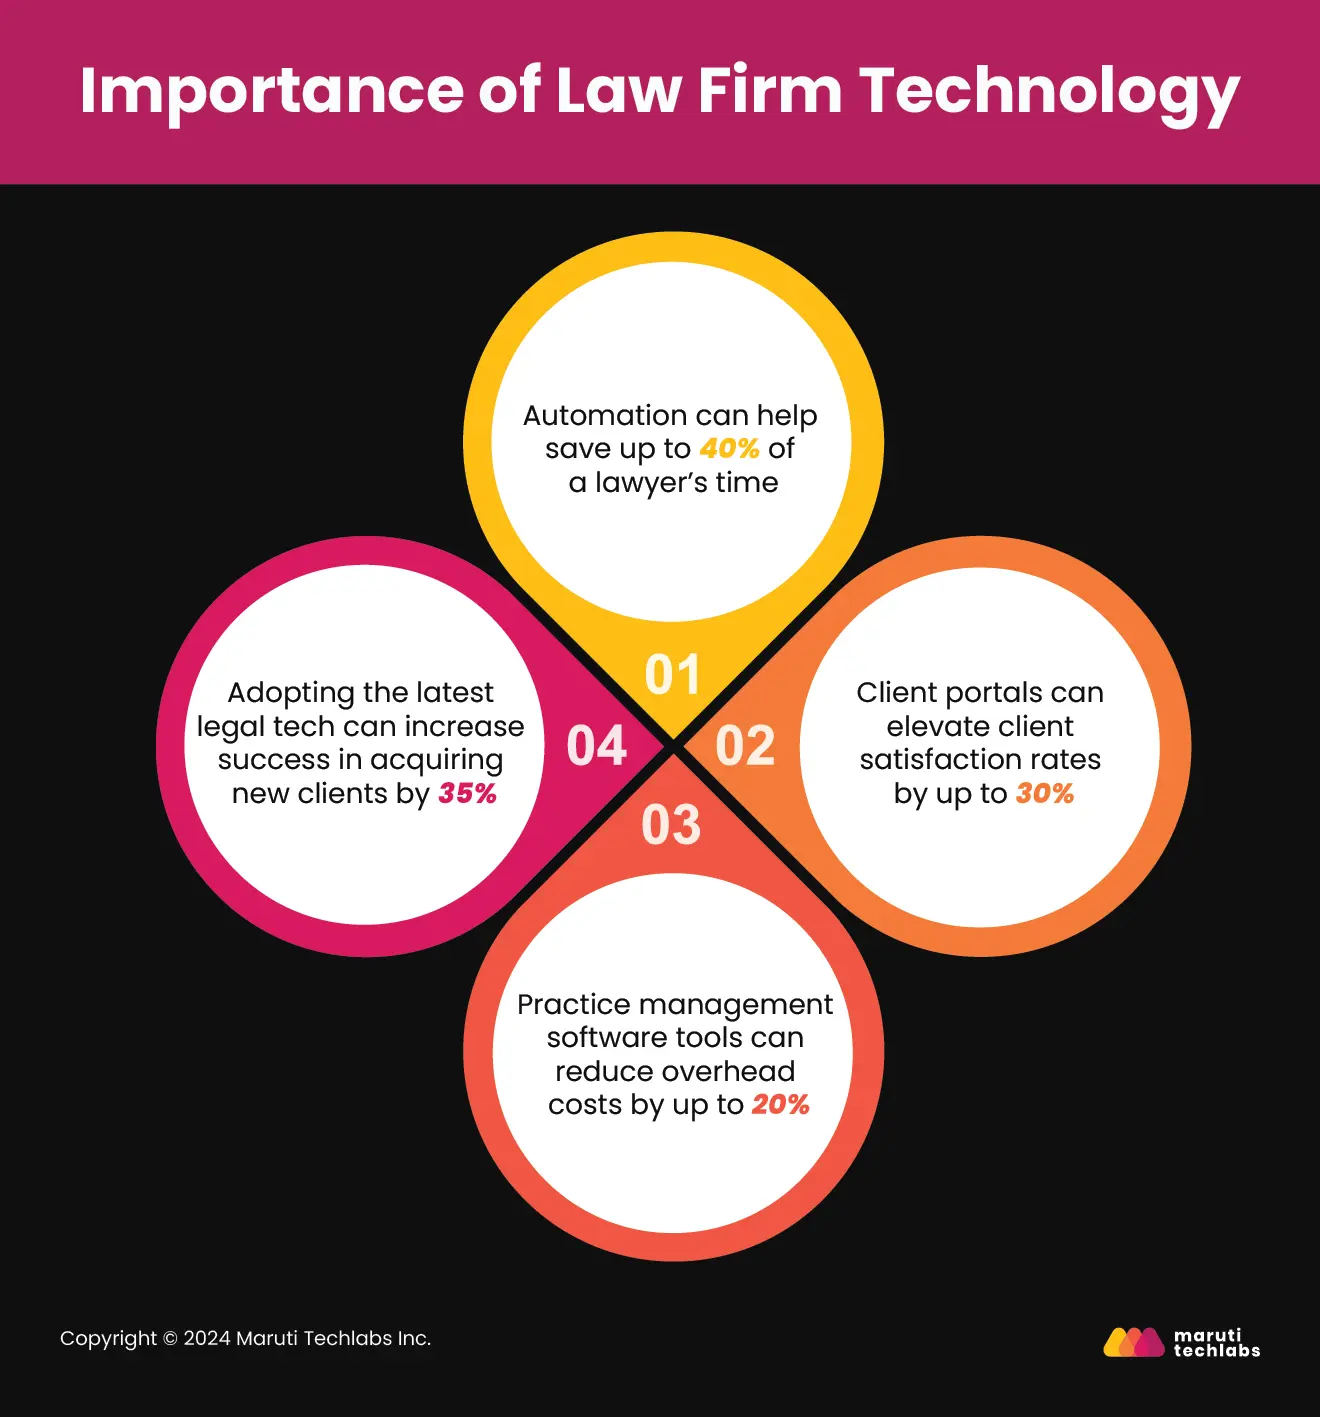 Importance of law firm technology